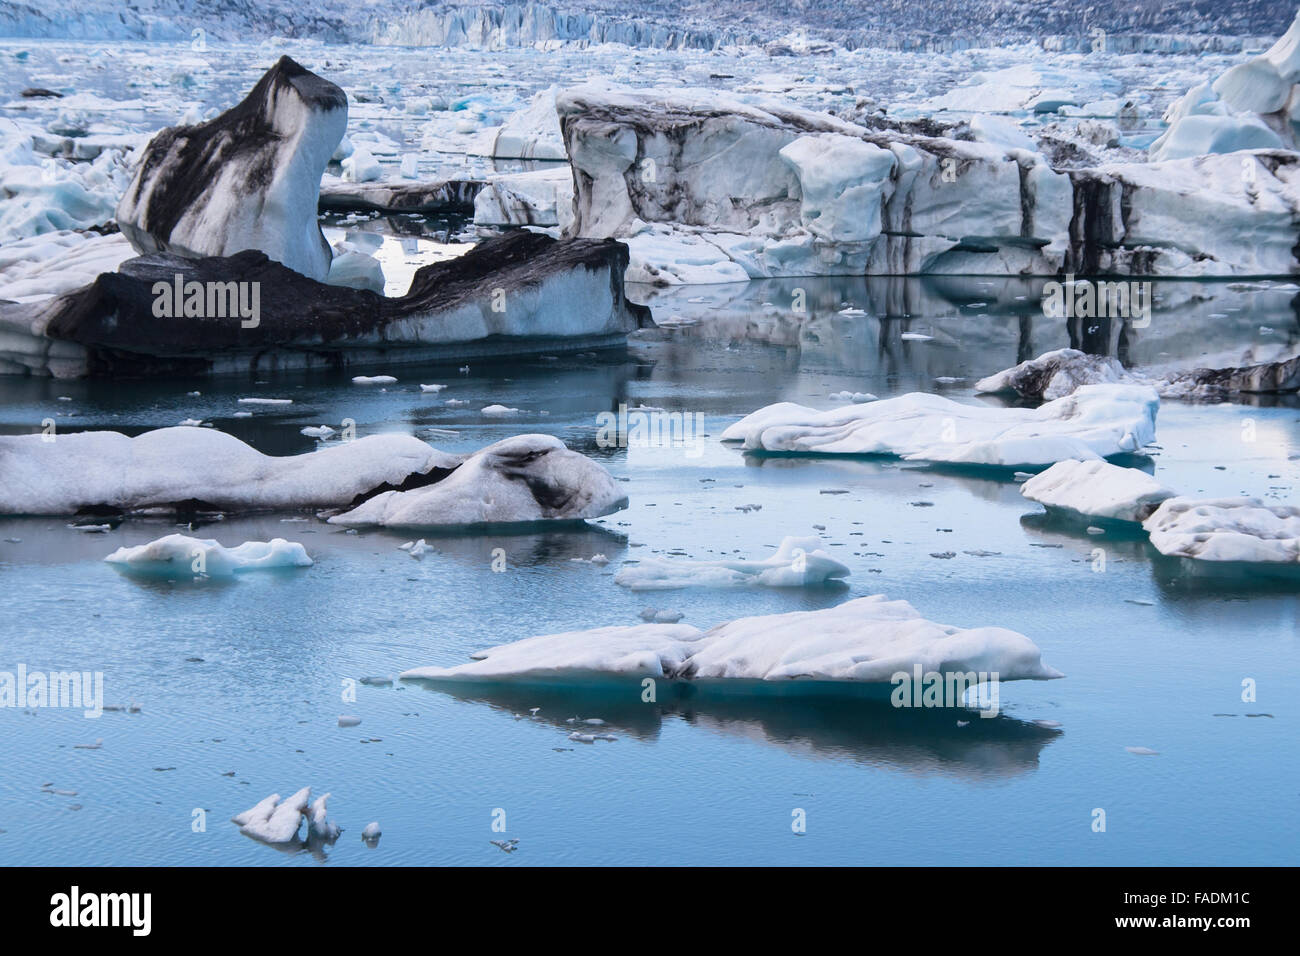 Icebergs in Jokulsarlon in the south of Iceland. Stock Photo